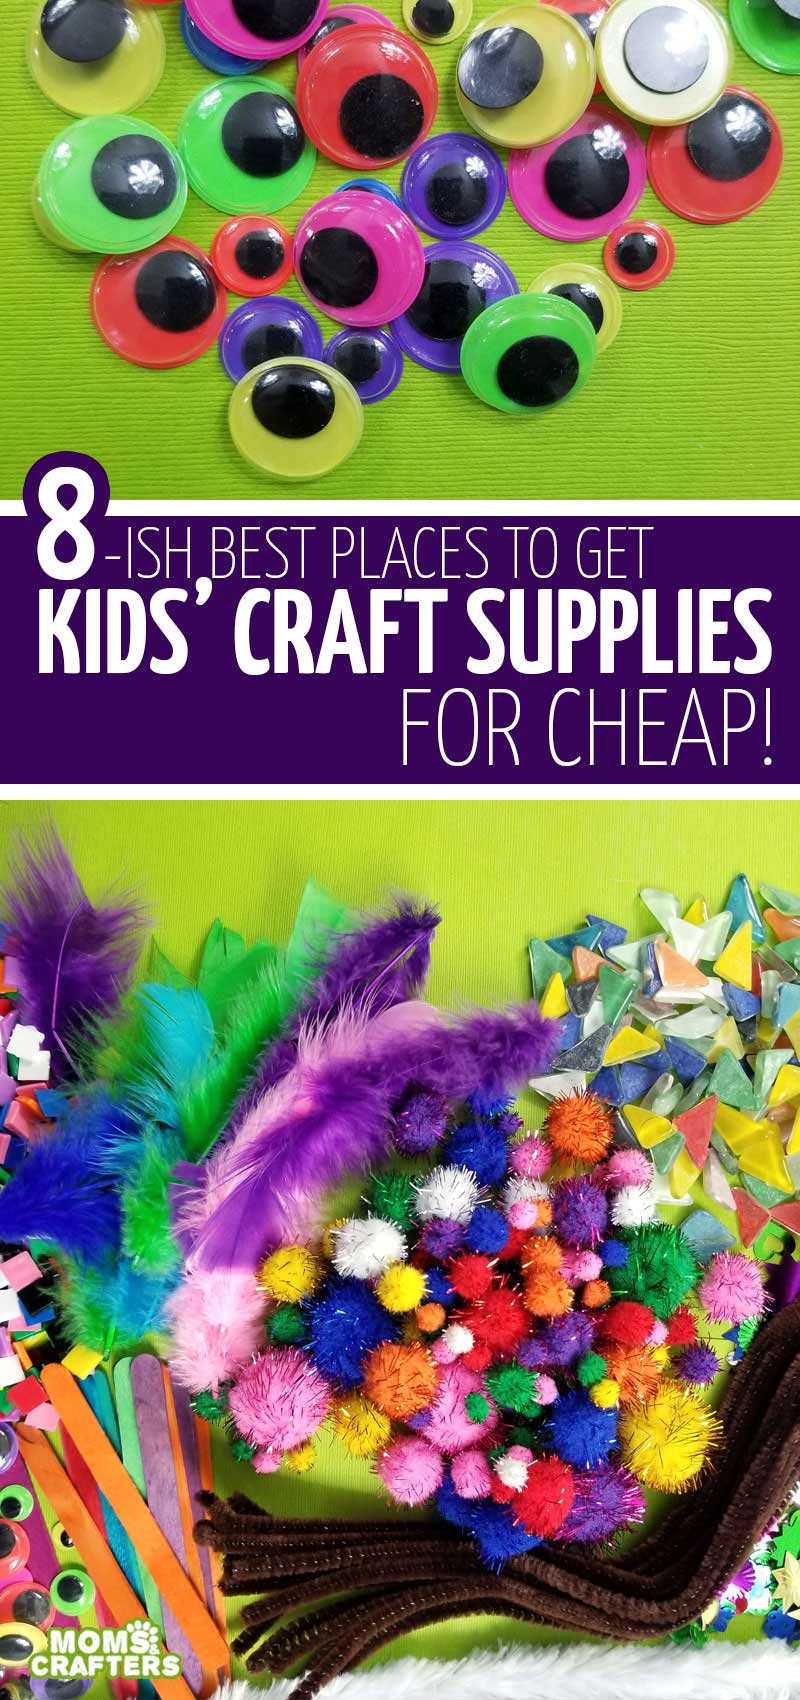 Bulk Art Supplies, Crafts & More at Wholesale Prices